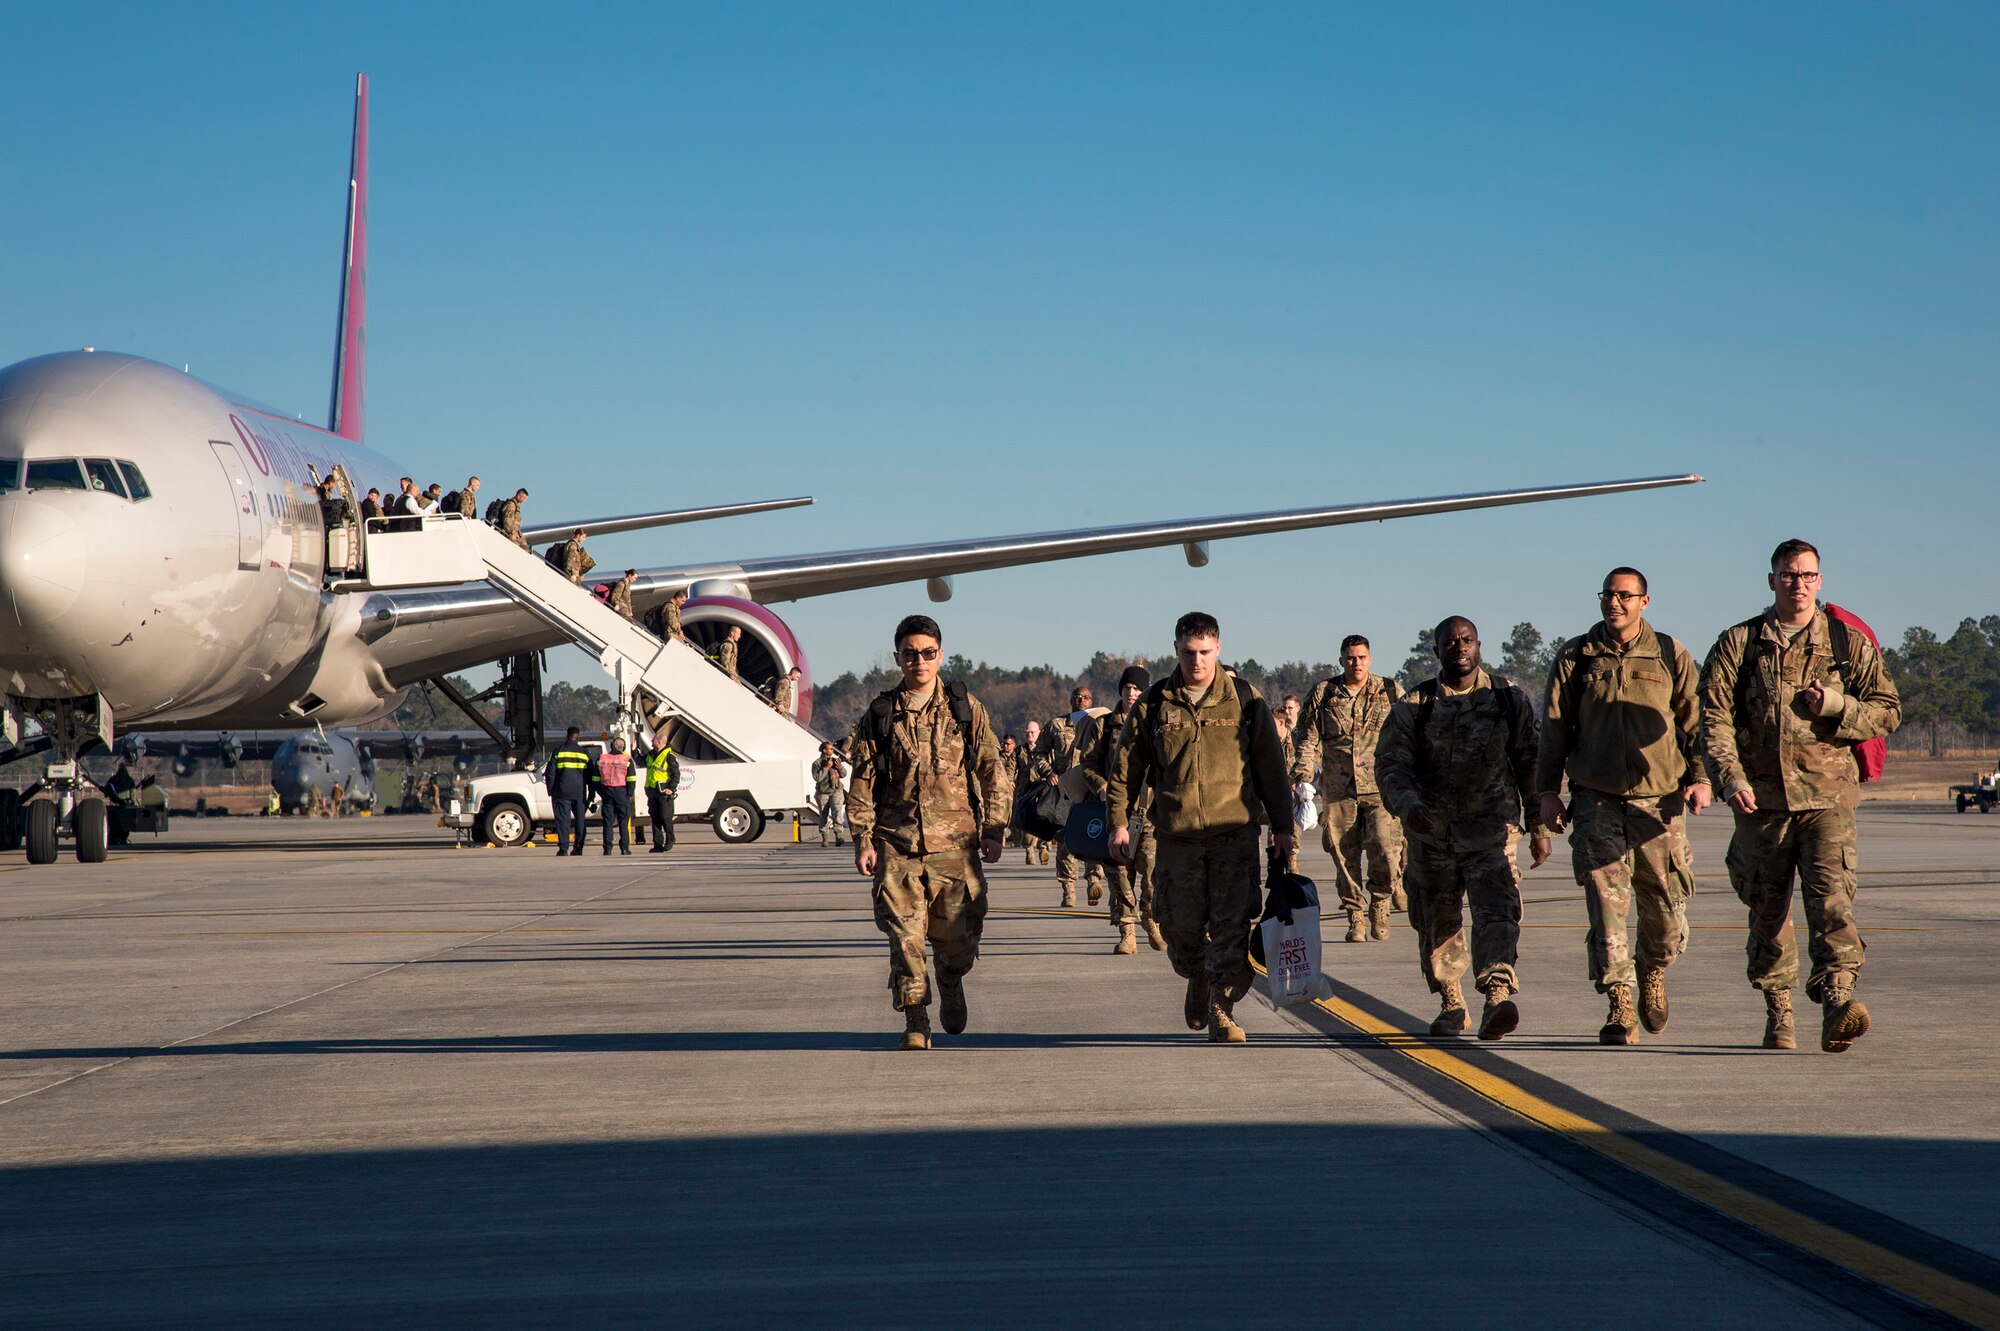 Airmen from the 74th Fighter Squadron exit the plane during a redeployment ceremony, Jan. 19, 2018, at Moody Air Force Base, Ga. Over 300 Airmen from Team Moody deployed for seven months in support of Operation Inherent Resolve to defeat ISIS in designated areas in Iraq and Syria. (U.S. Air Force photo by Andrea Jenkins)